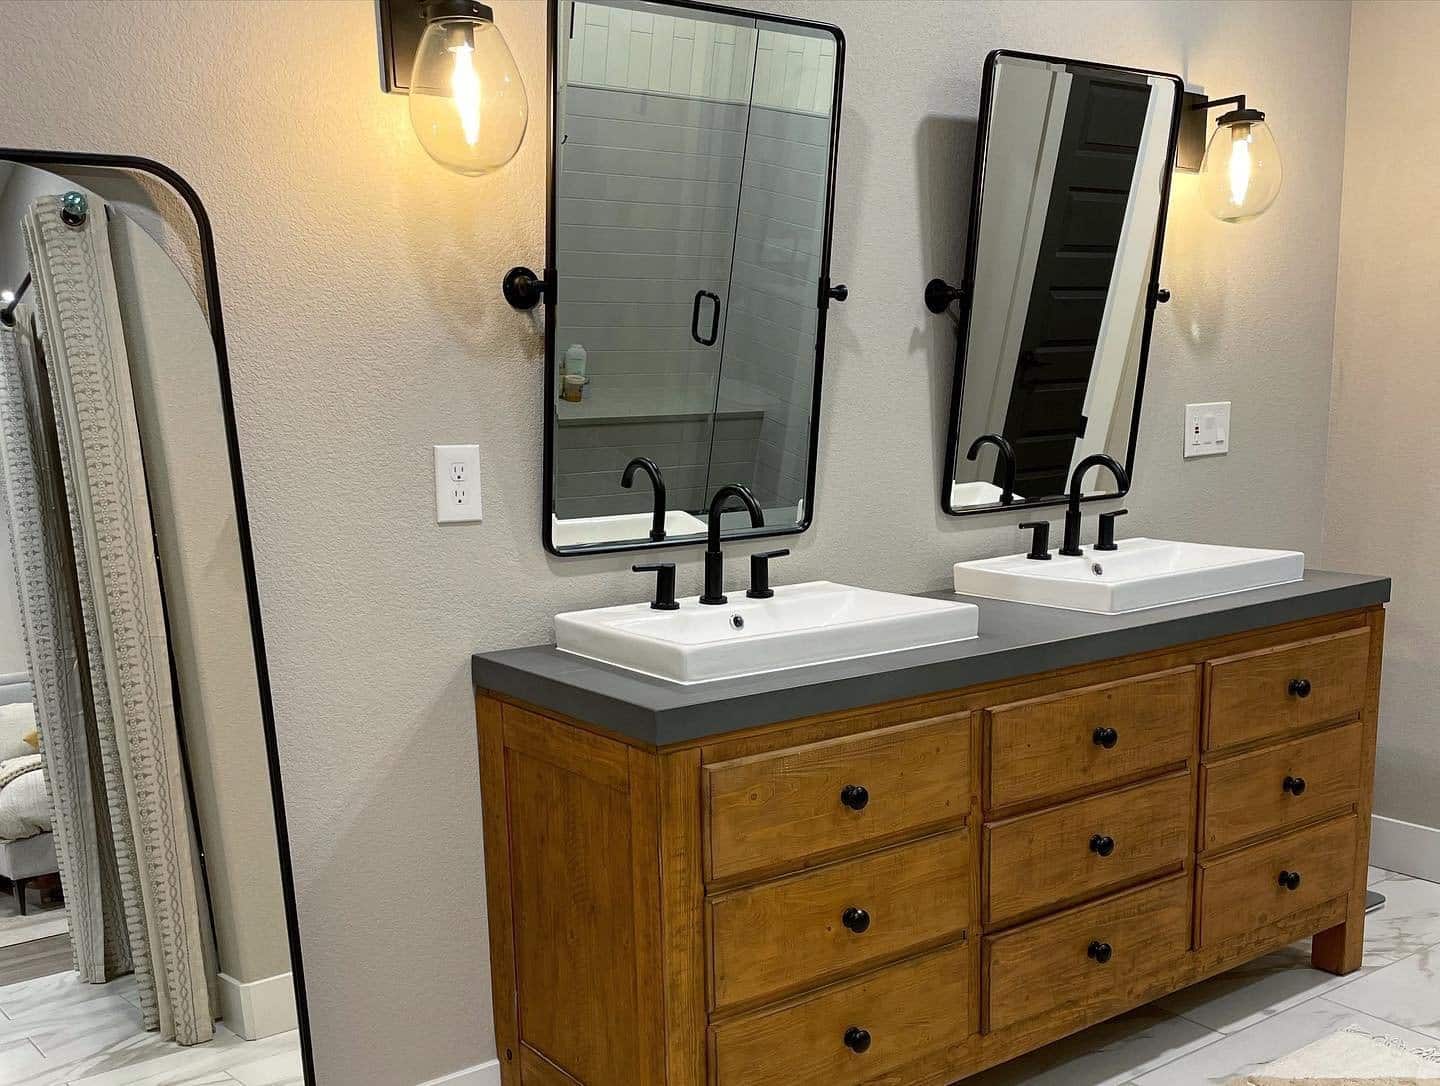 Industrial style double vanity with wood cabinets and black metal trim around mirrors